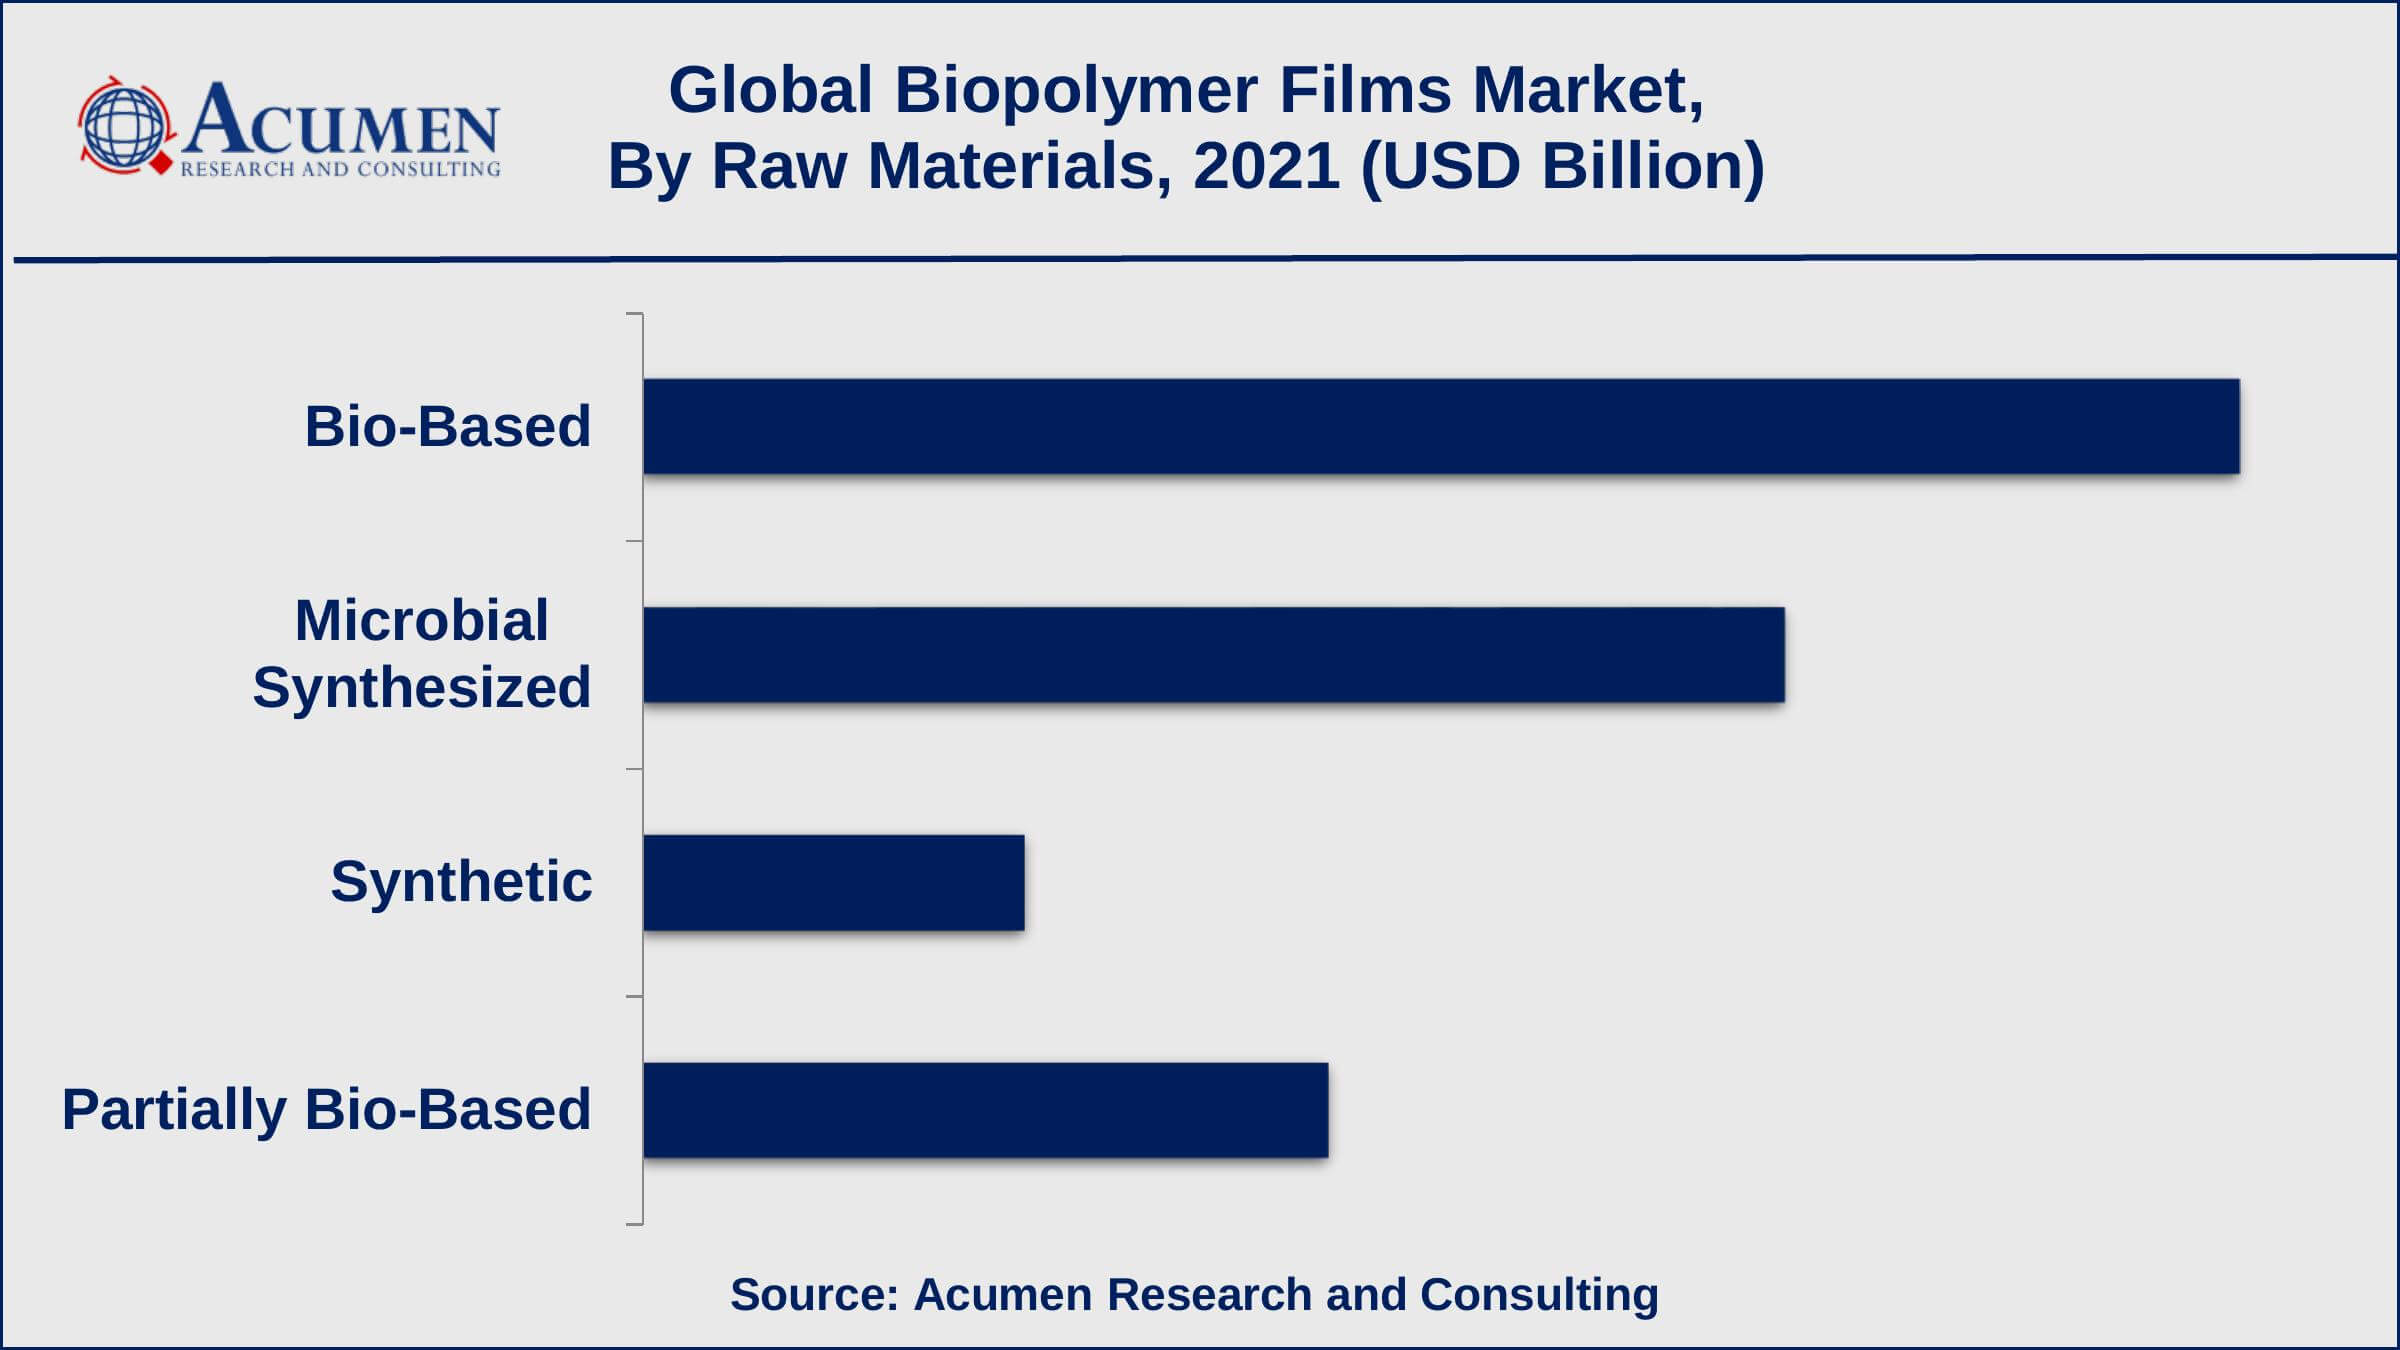 Based on raw materials, PLA Films captured around 42% of the overall market share in 2021